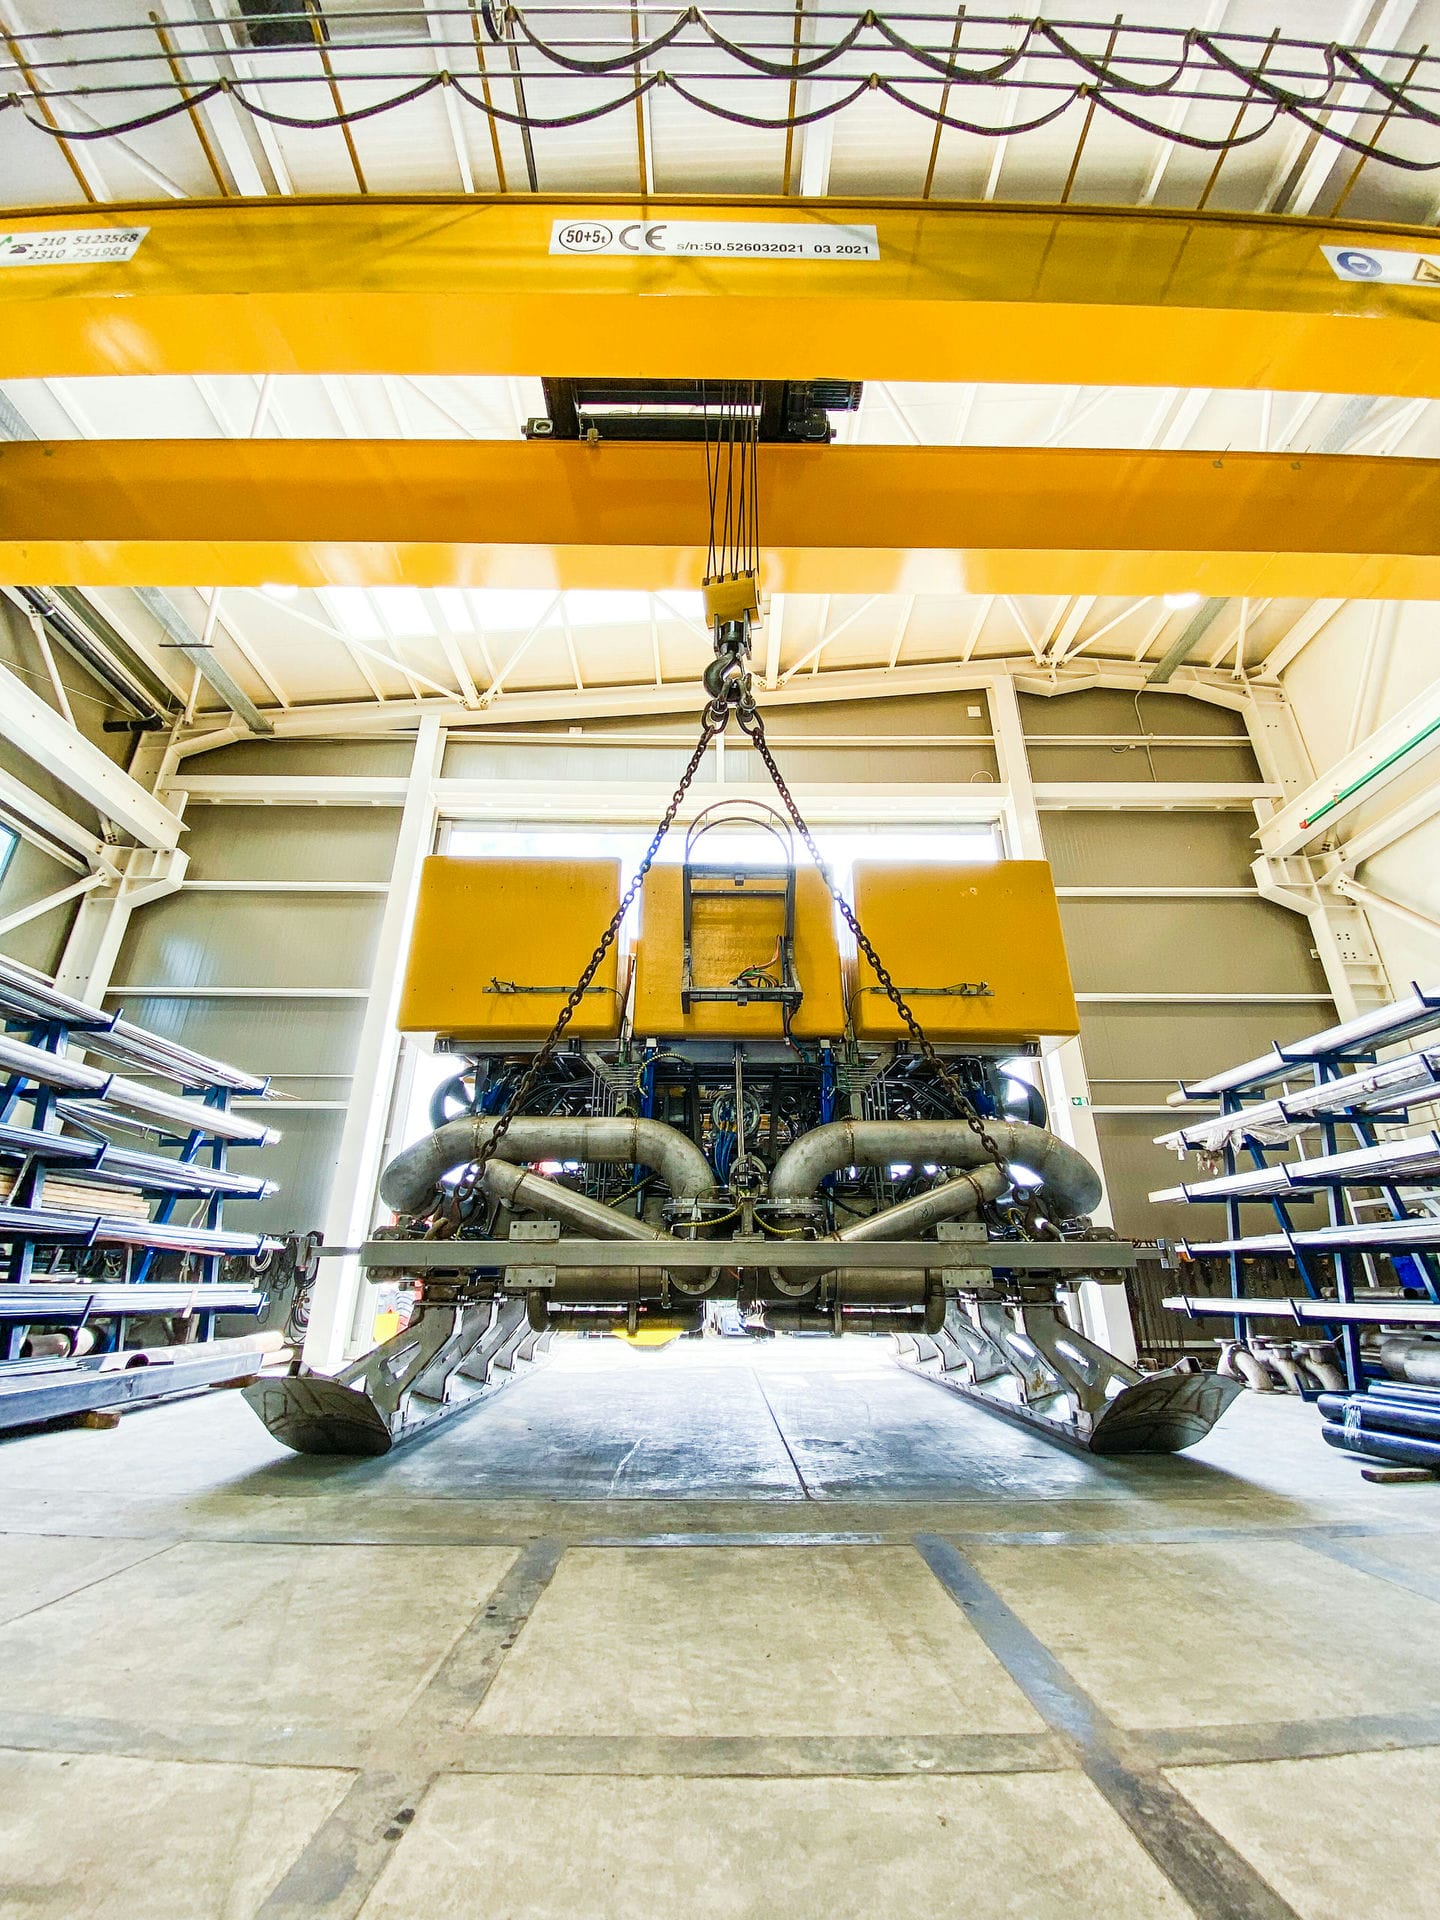 Asso.subsea unveils its latest jet trenching tool AssoJet III Mk2 10